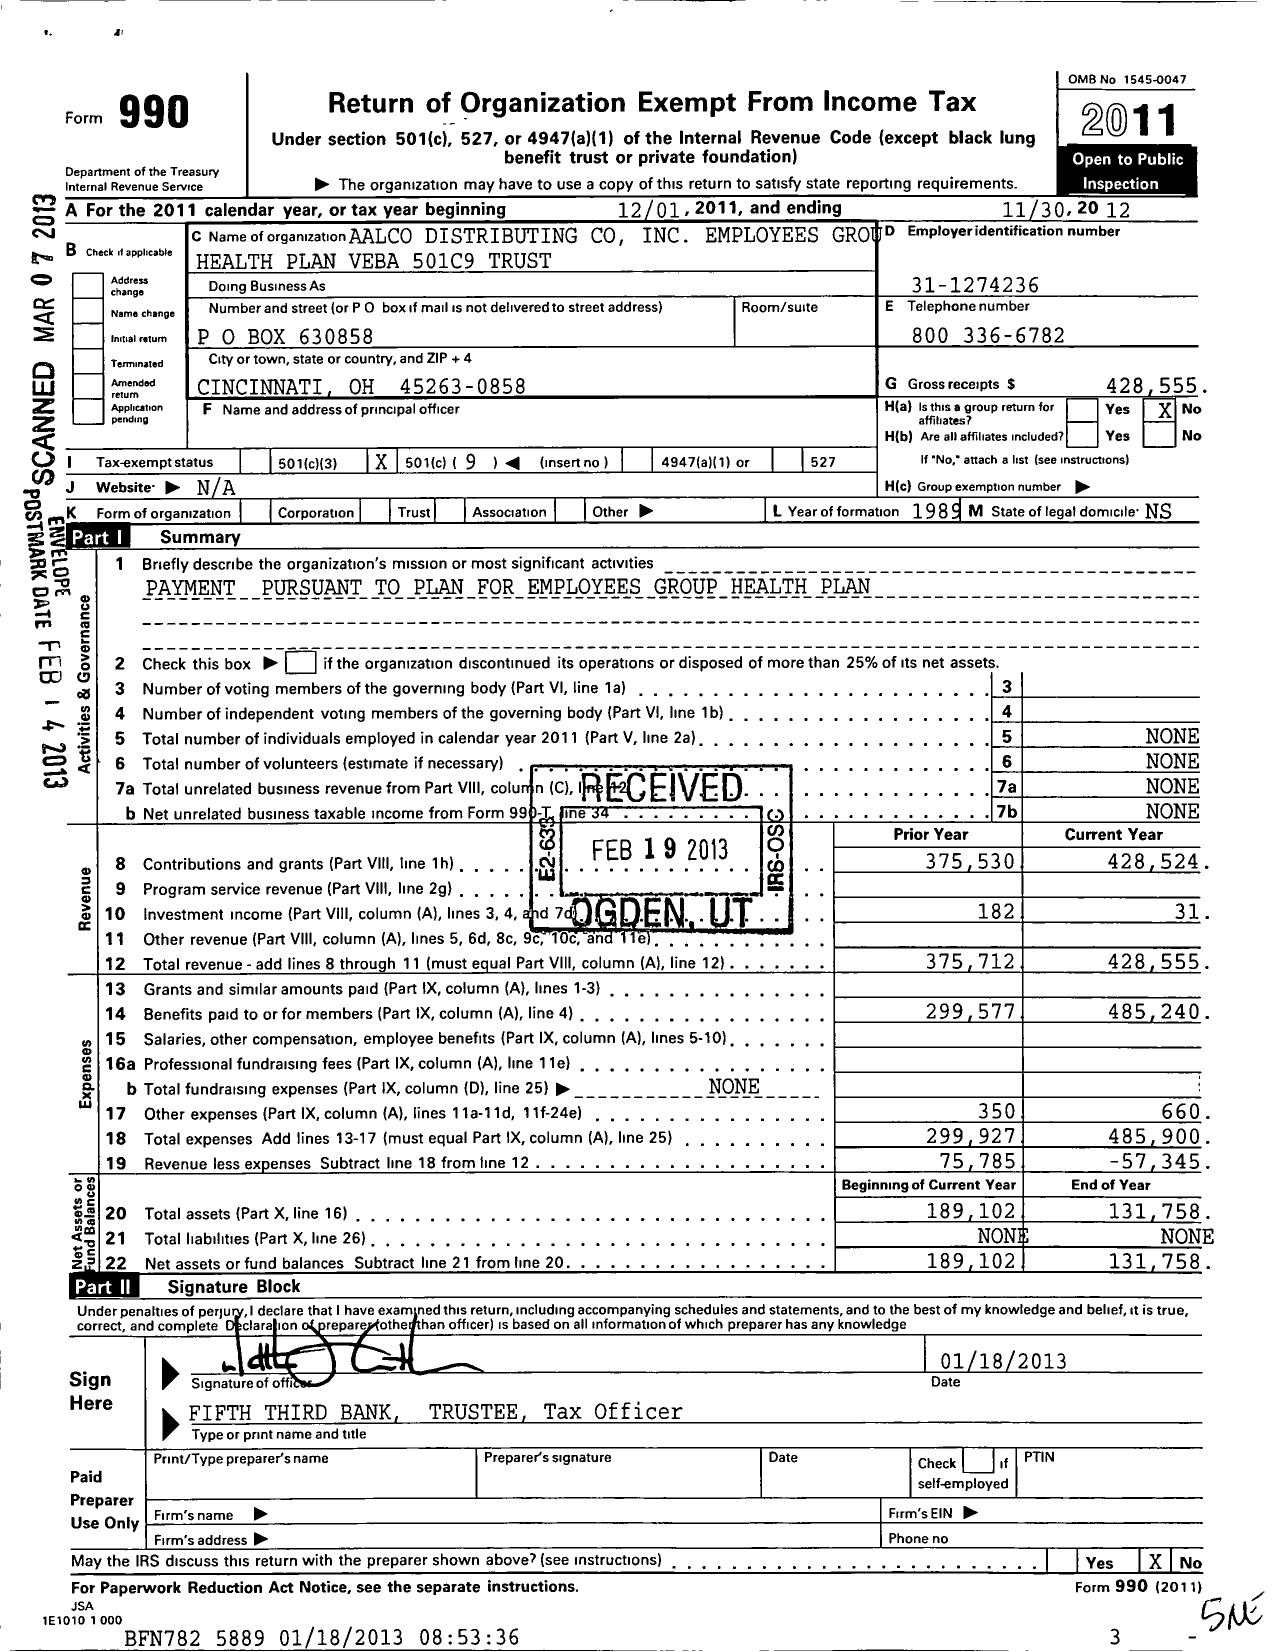 Image of first page of 2011 Form 990O for Aalco Distributing Employees Group Health Plan Veba 501c9